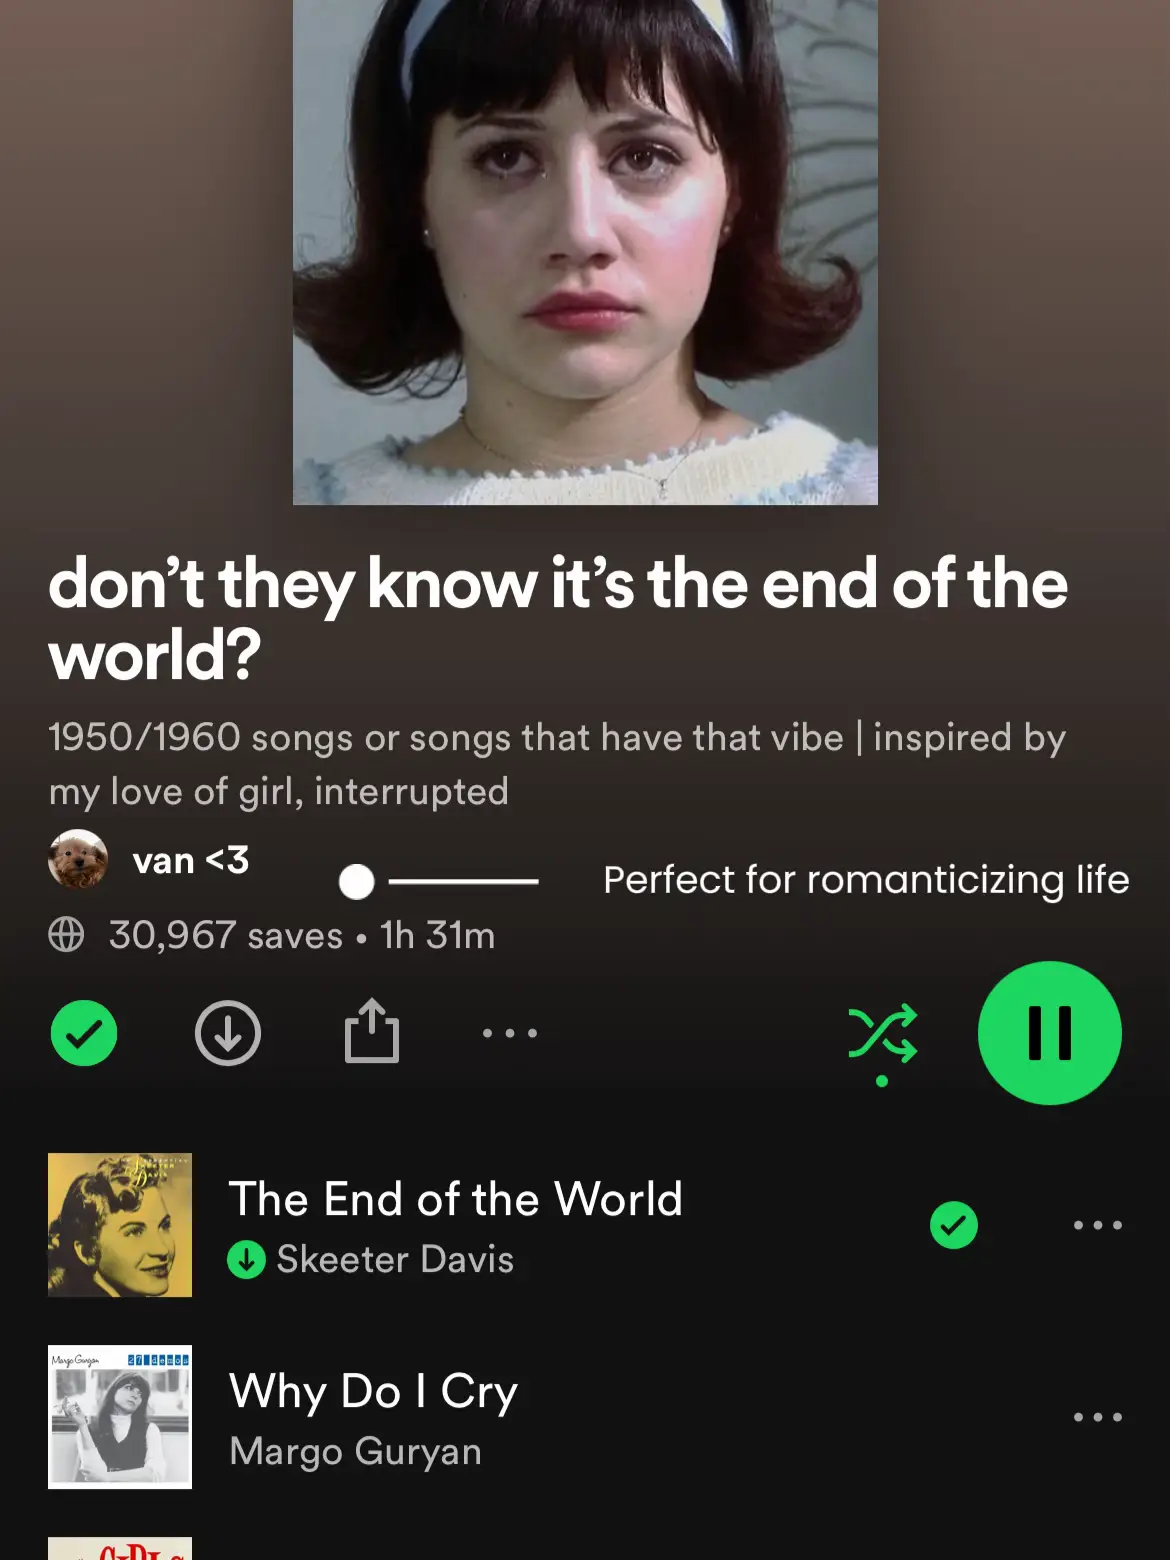  A playlist of songs from the 1950s and 1960s with the words "Don't they know it's the end of the world?" at the top.